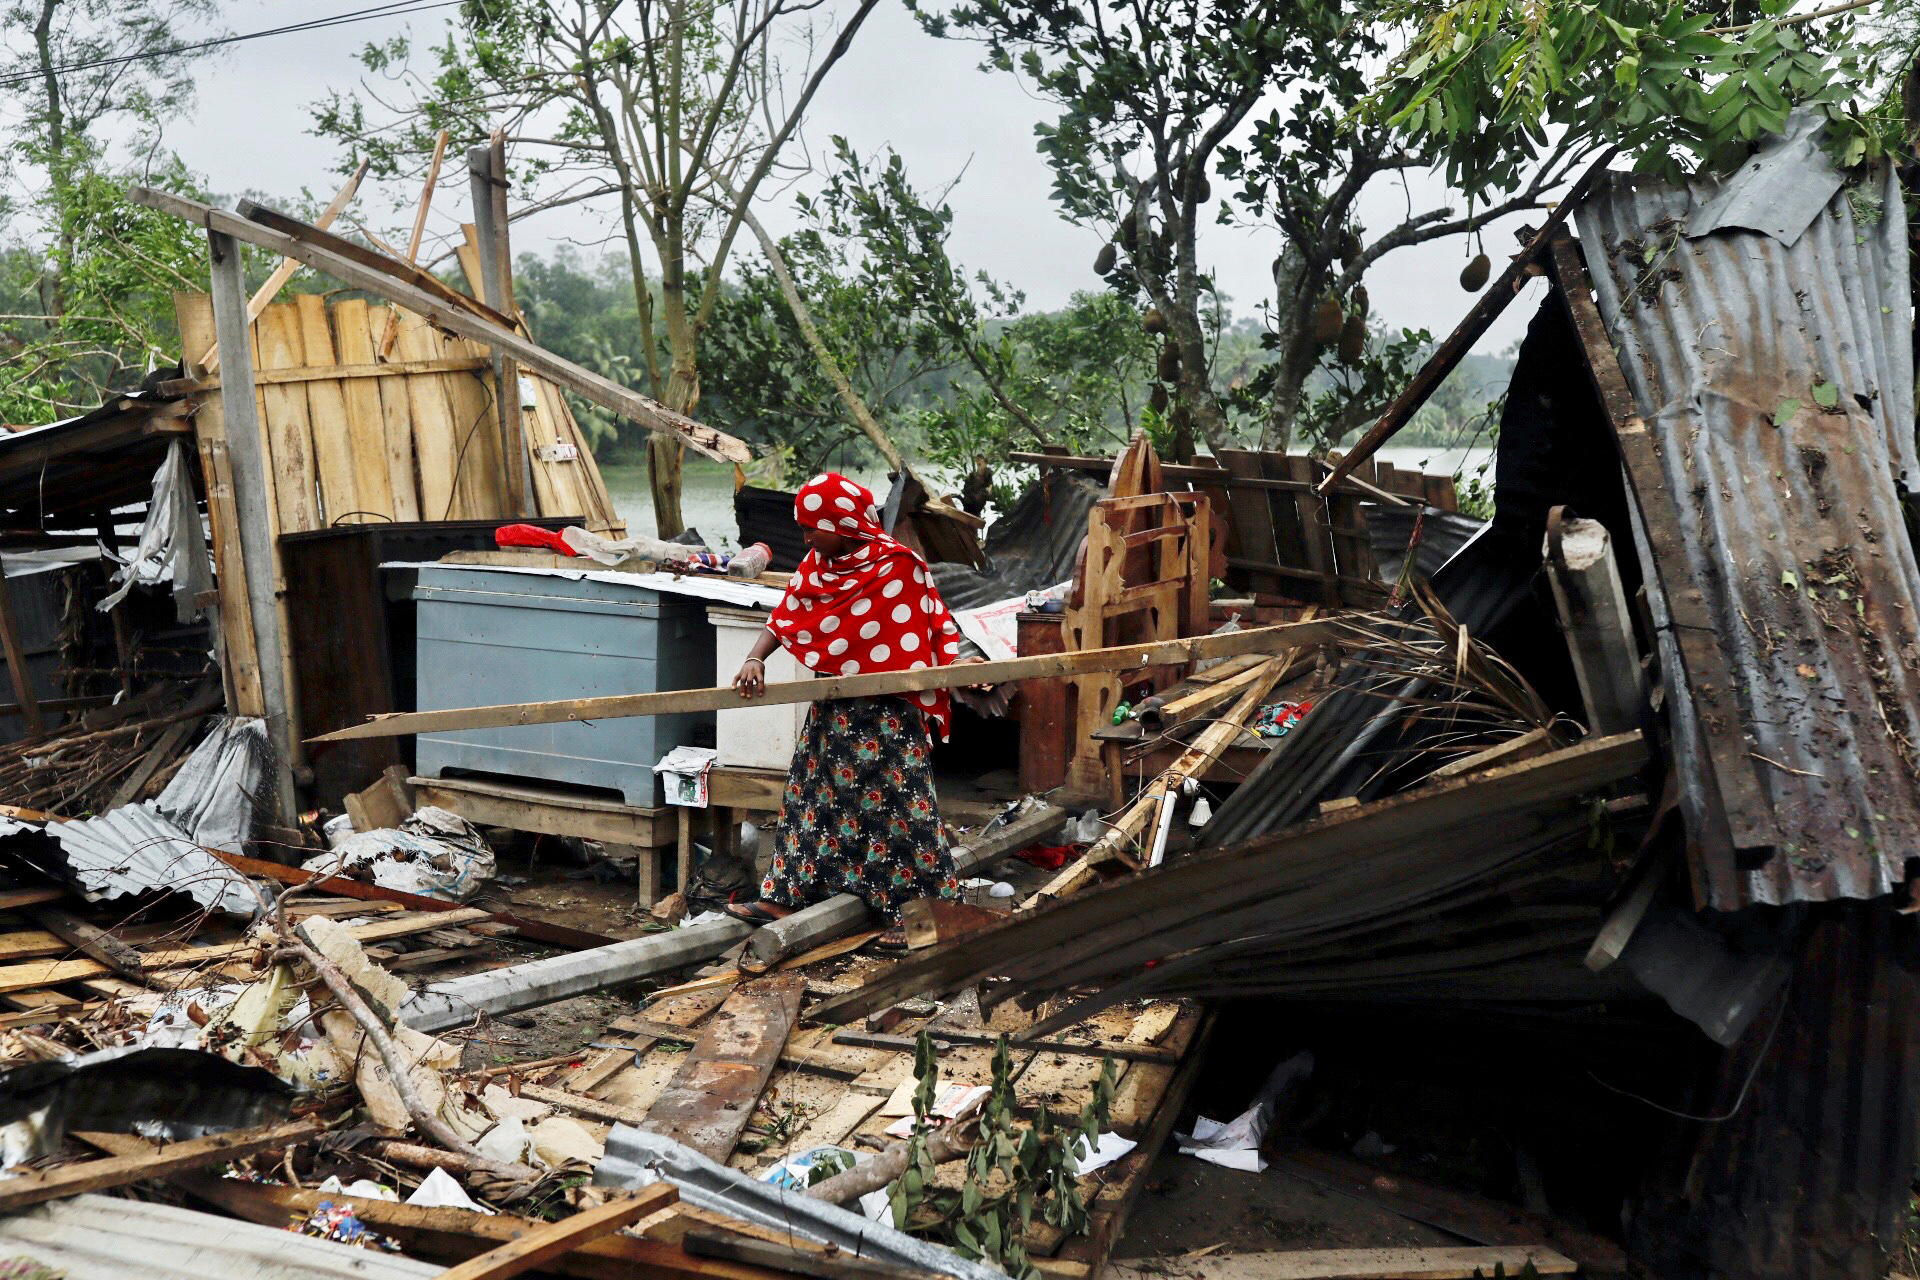 PHOTO: A woman clears her house that was demolished by the cyclone Amphan in Satkhira, Bangladesh May 21, 2020.